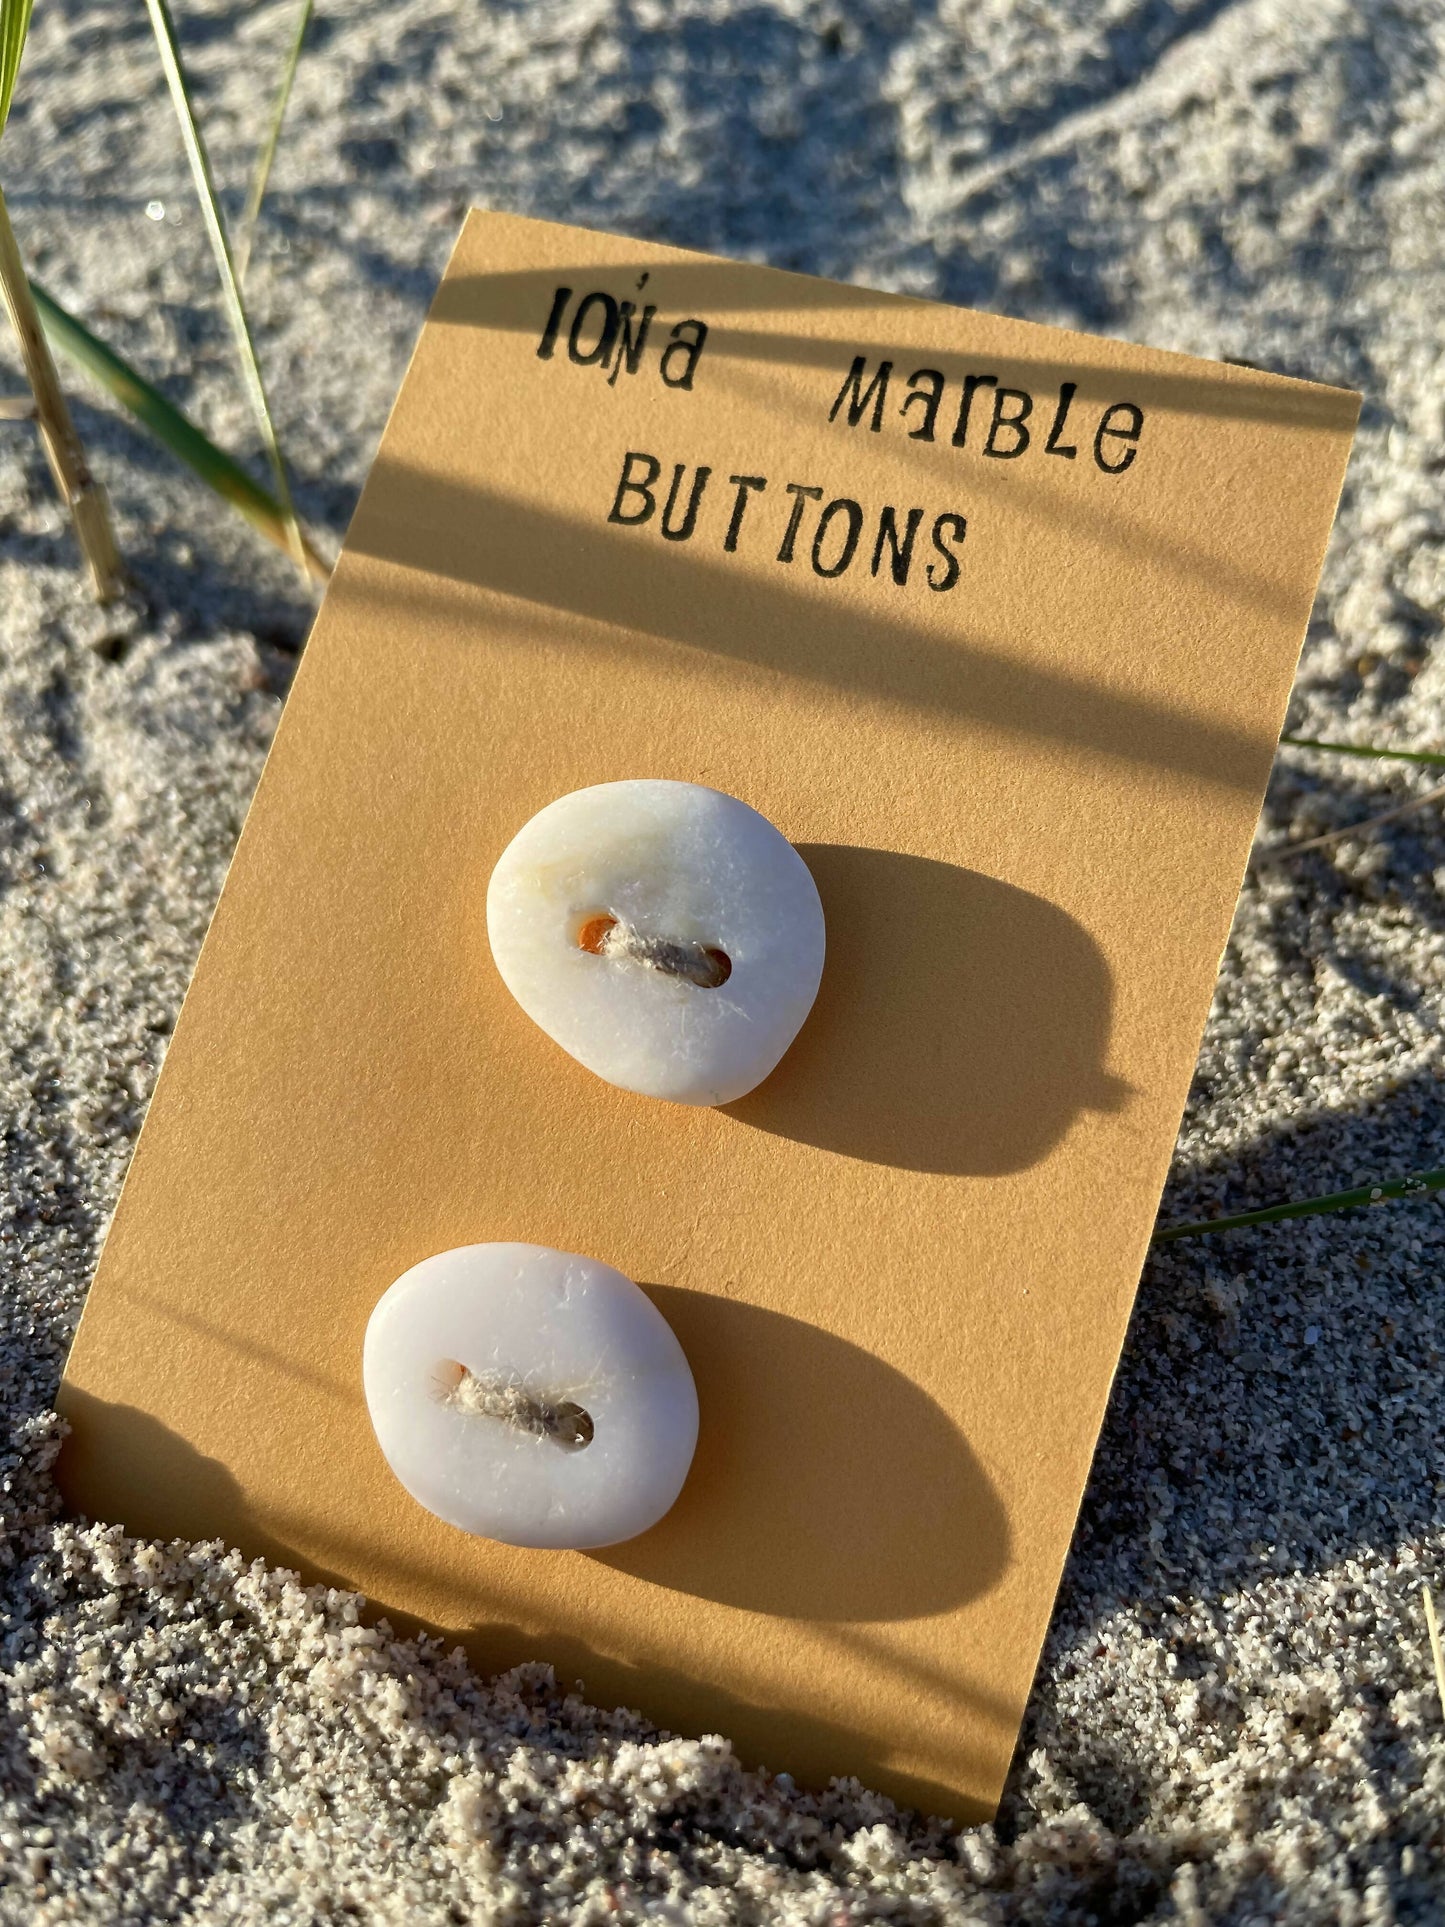 Iona Marble Buttons - 5